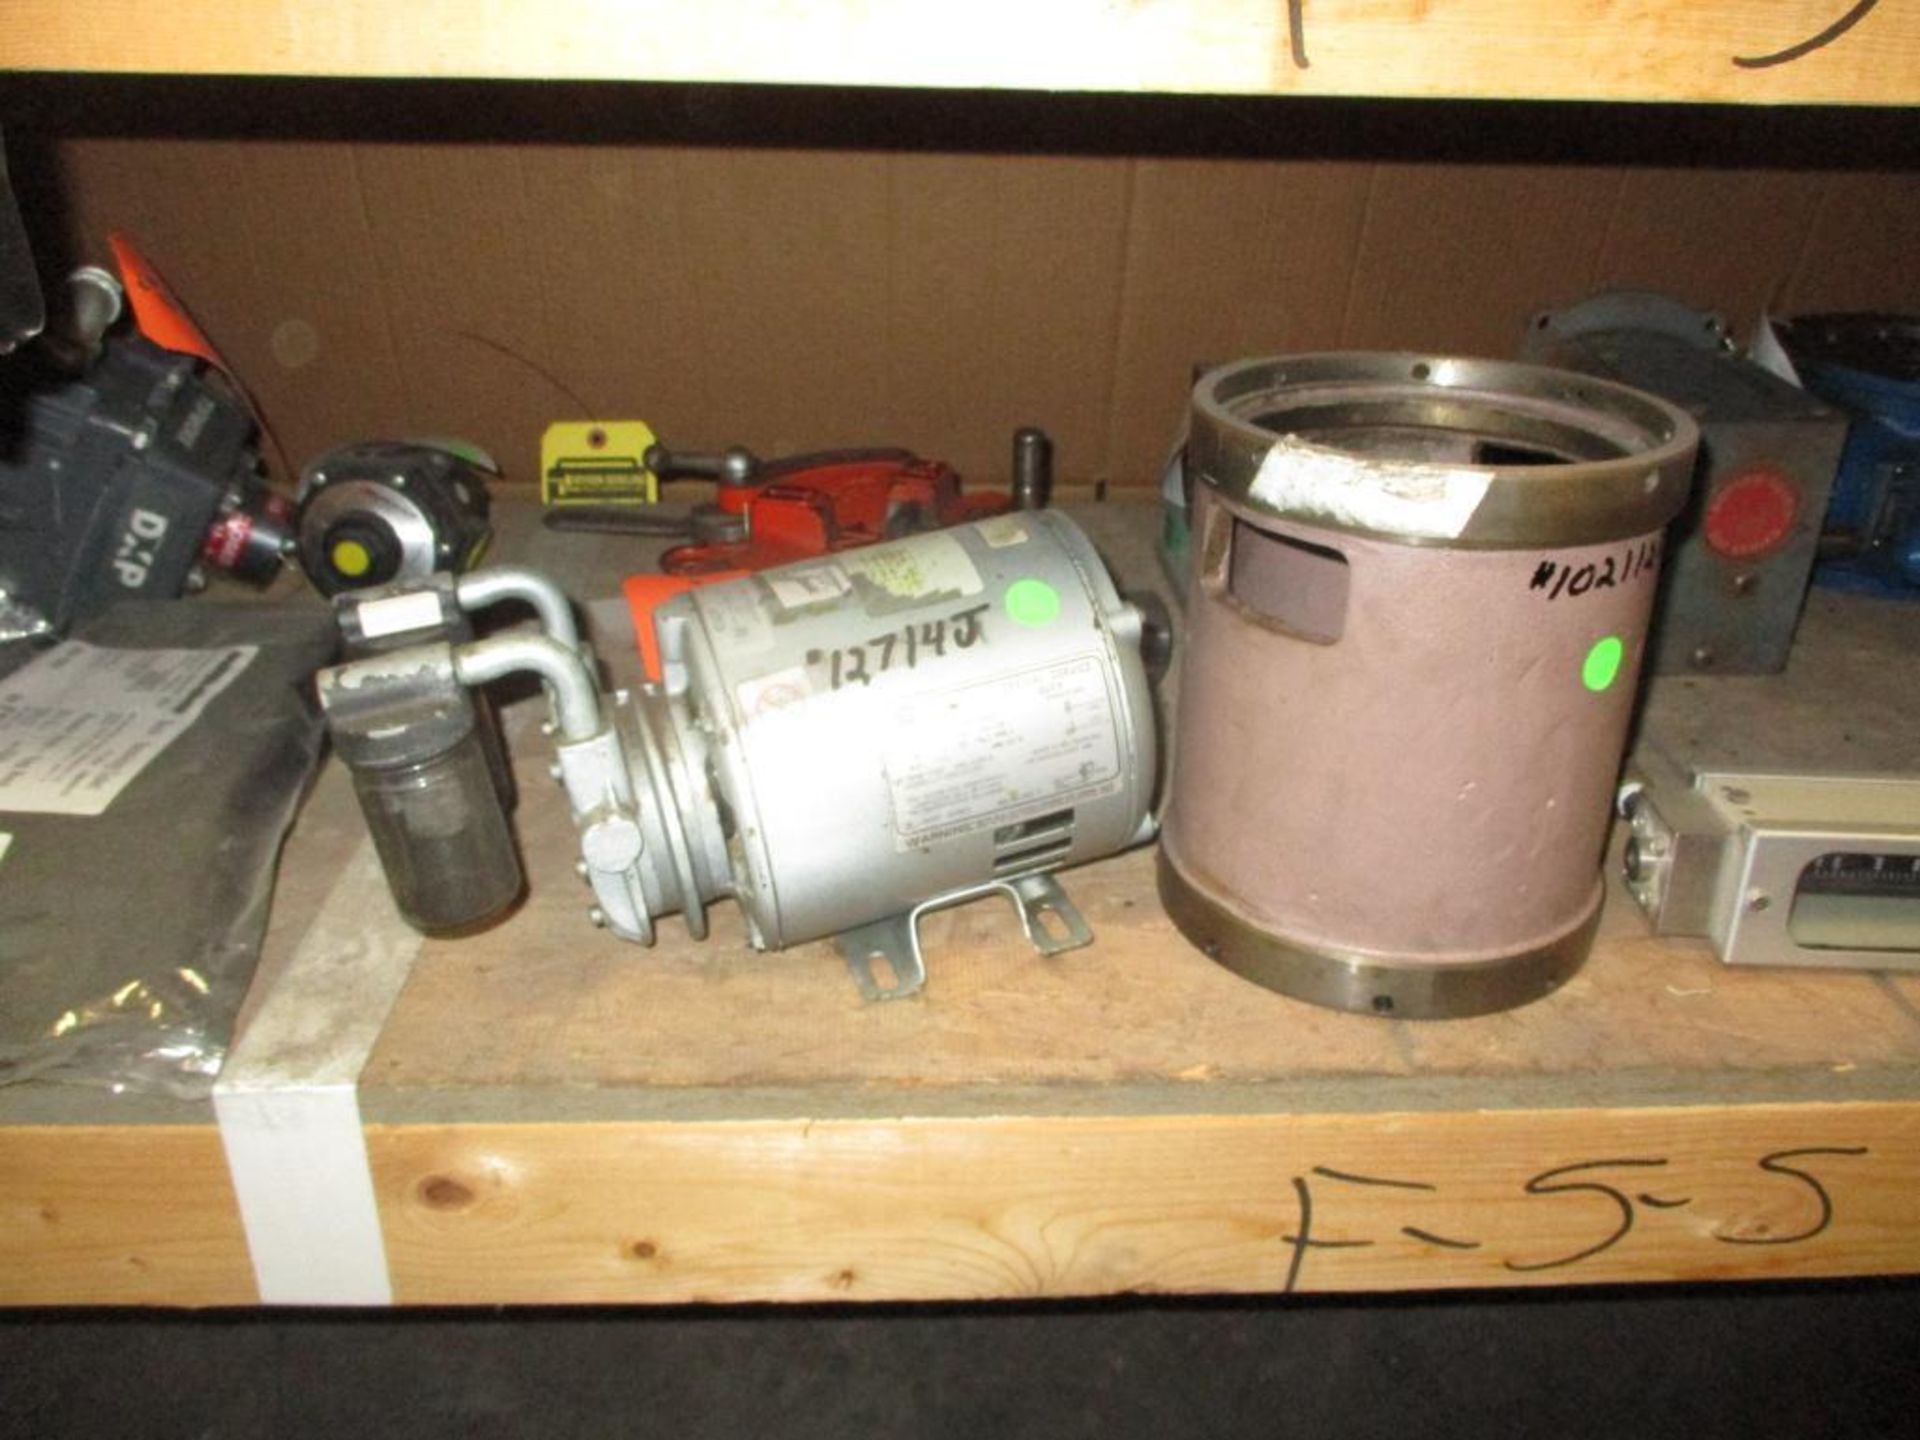 Contents of Shelf F-5-5 & F-6-5; Boston Gearbox, ASCO, DXP, Fairchild, Hubbell, PMC - Image 5 of 6